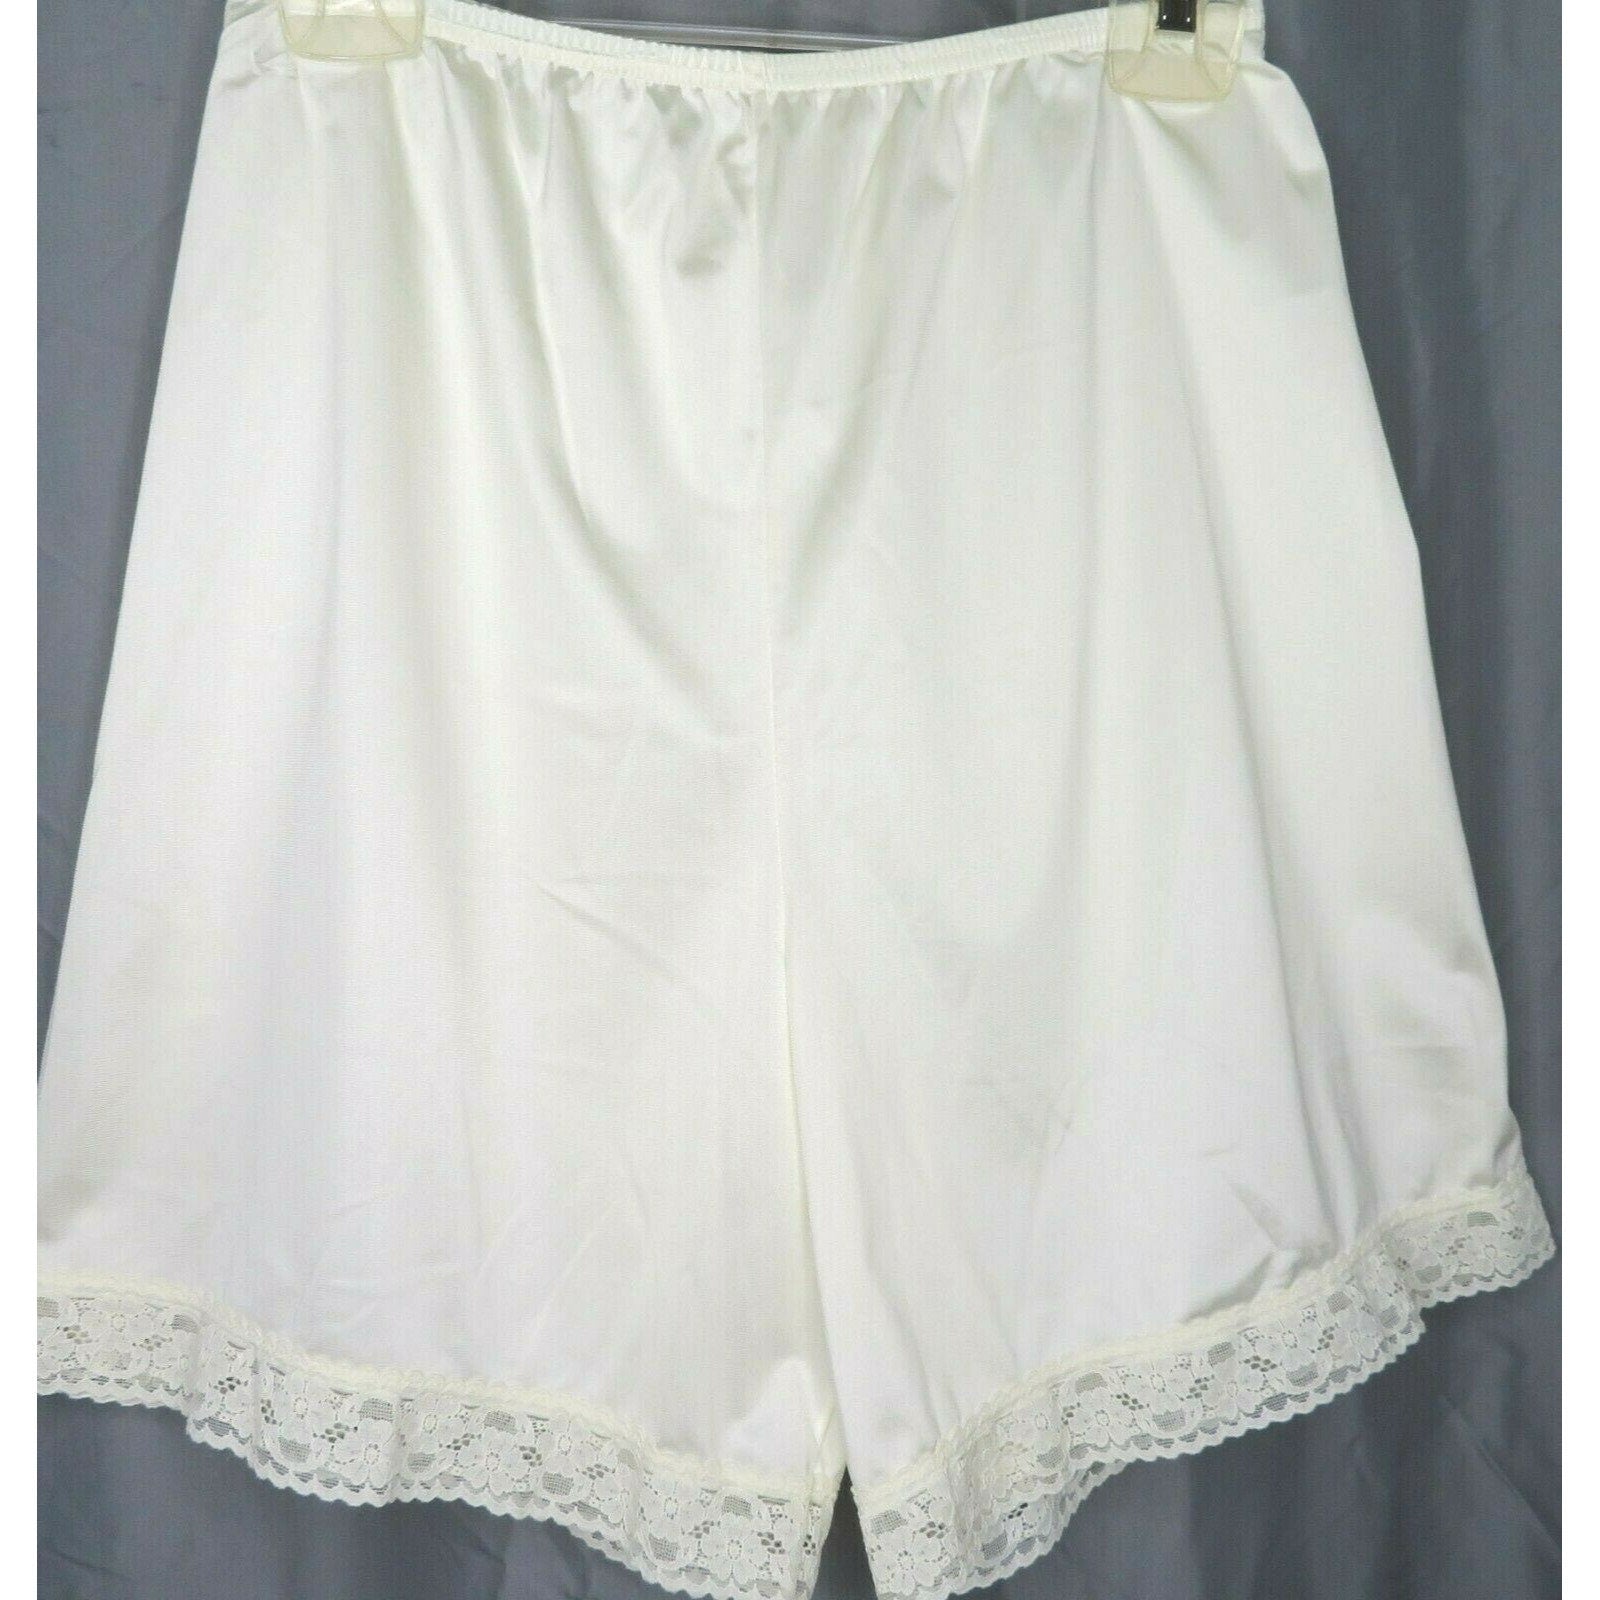 Vintage White Nylon Lace Modest Panties by Vanity Fair | Shop THRILLING